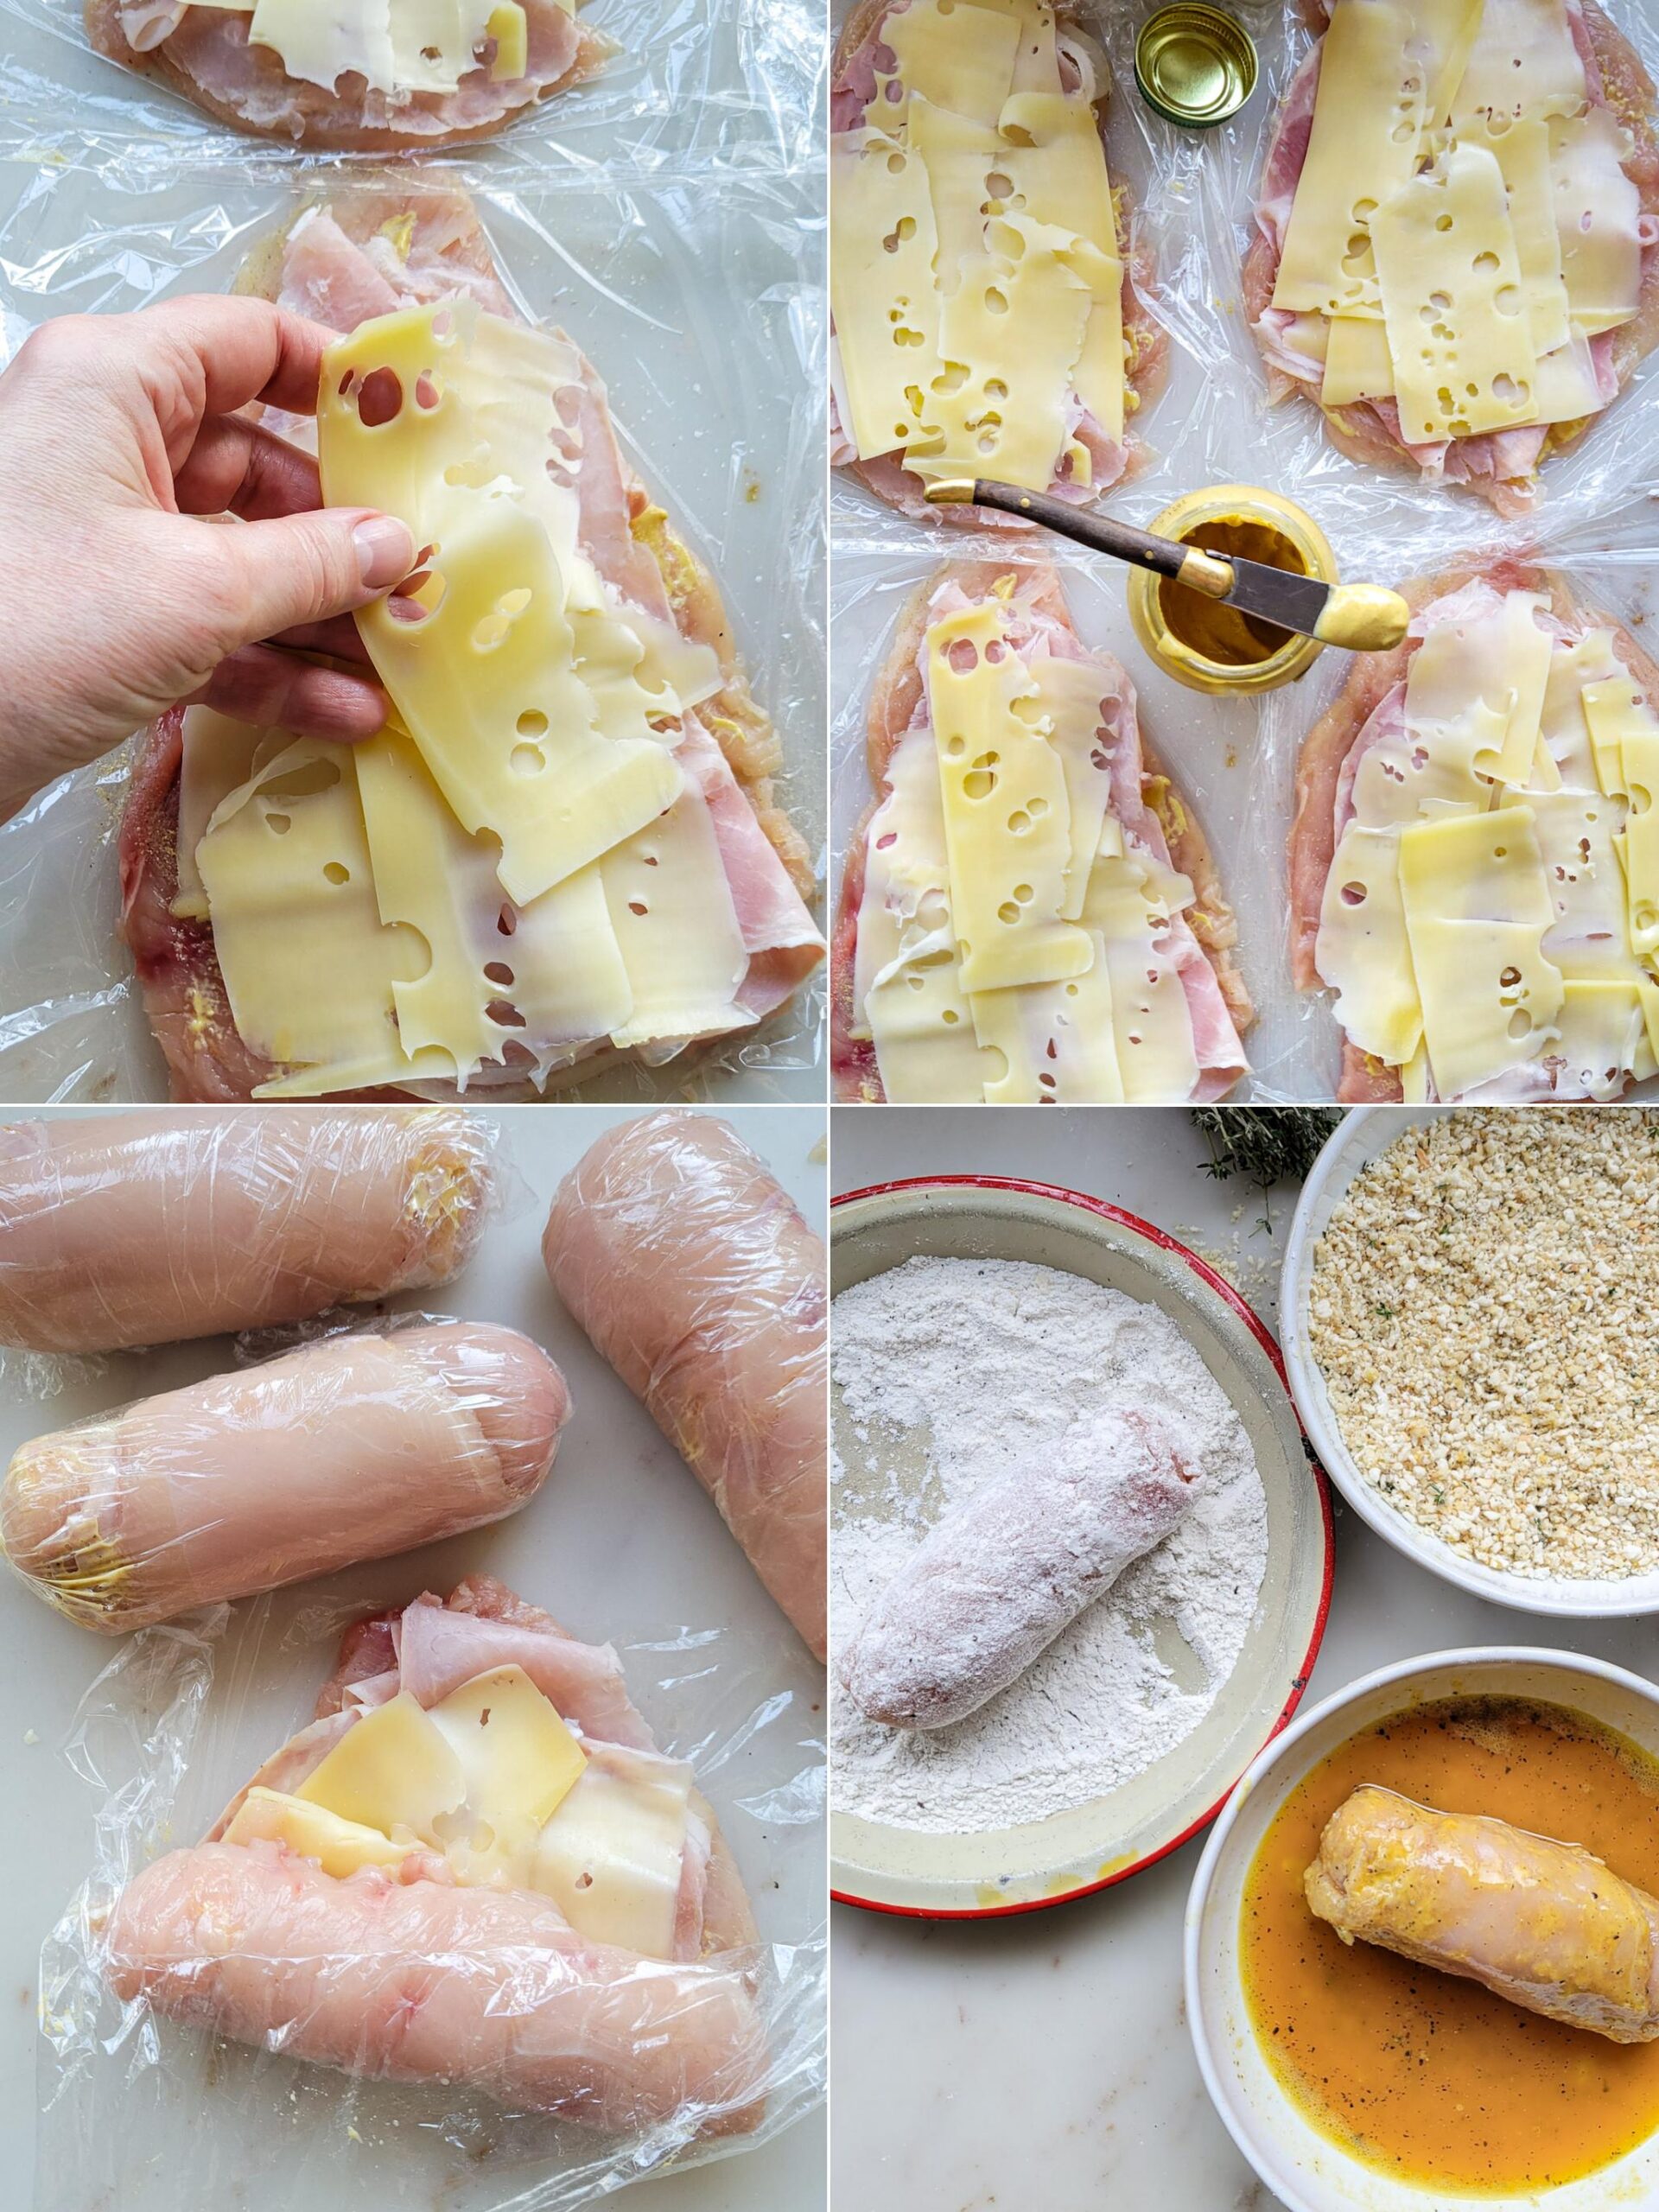 Collage showing the assembling of the chicken bundles for Chicken Cordon Bleu.